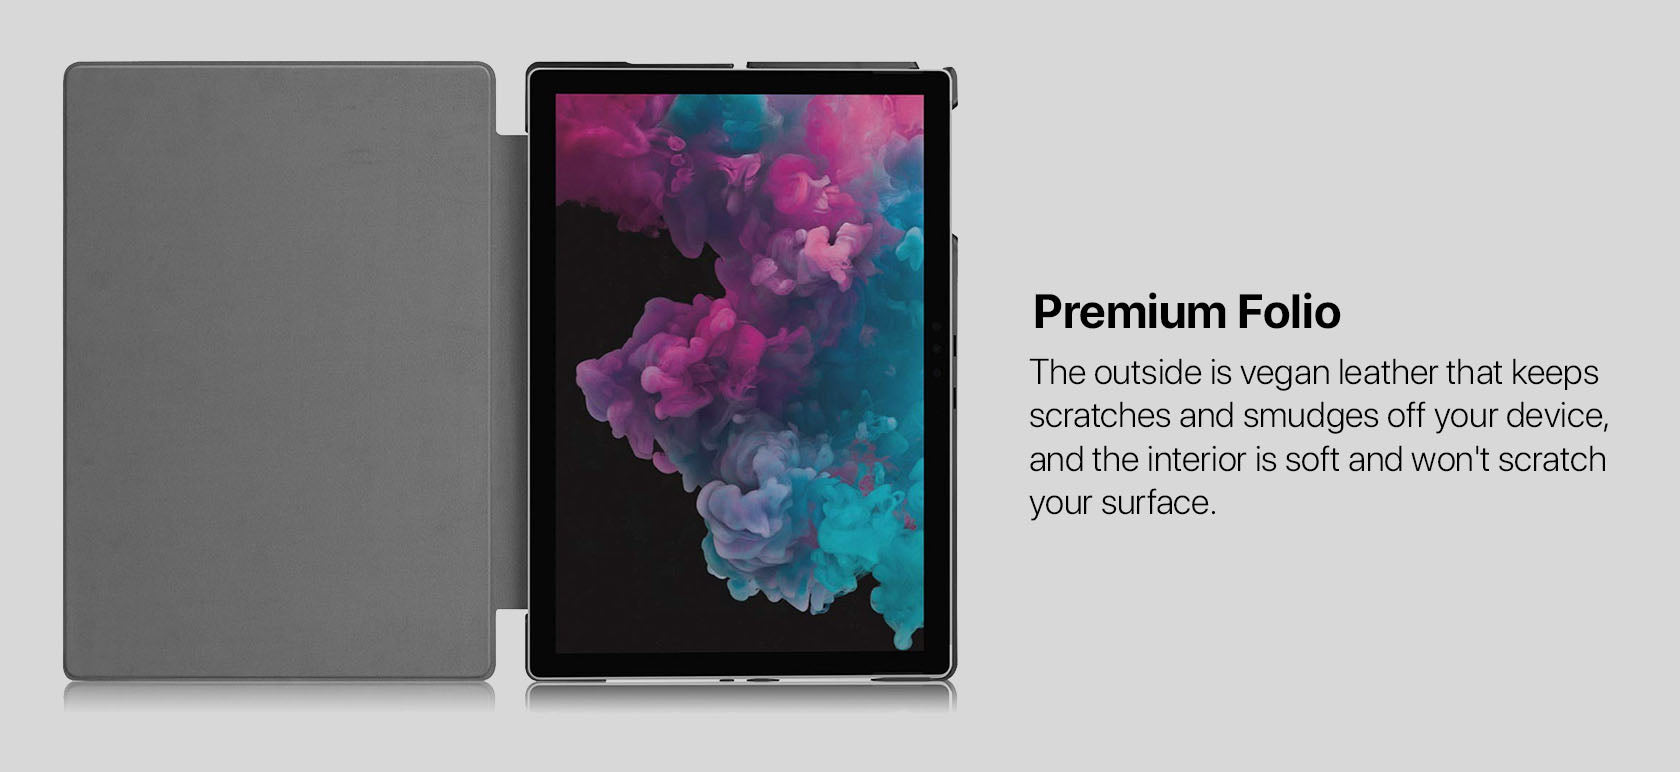 Premium Folio - The outside is vegan leather that keeps scratches and smudges off your device, and the interior is soft and won't scratch your surface.